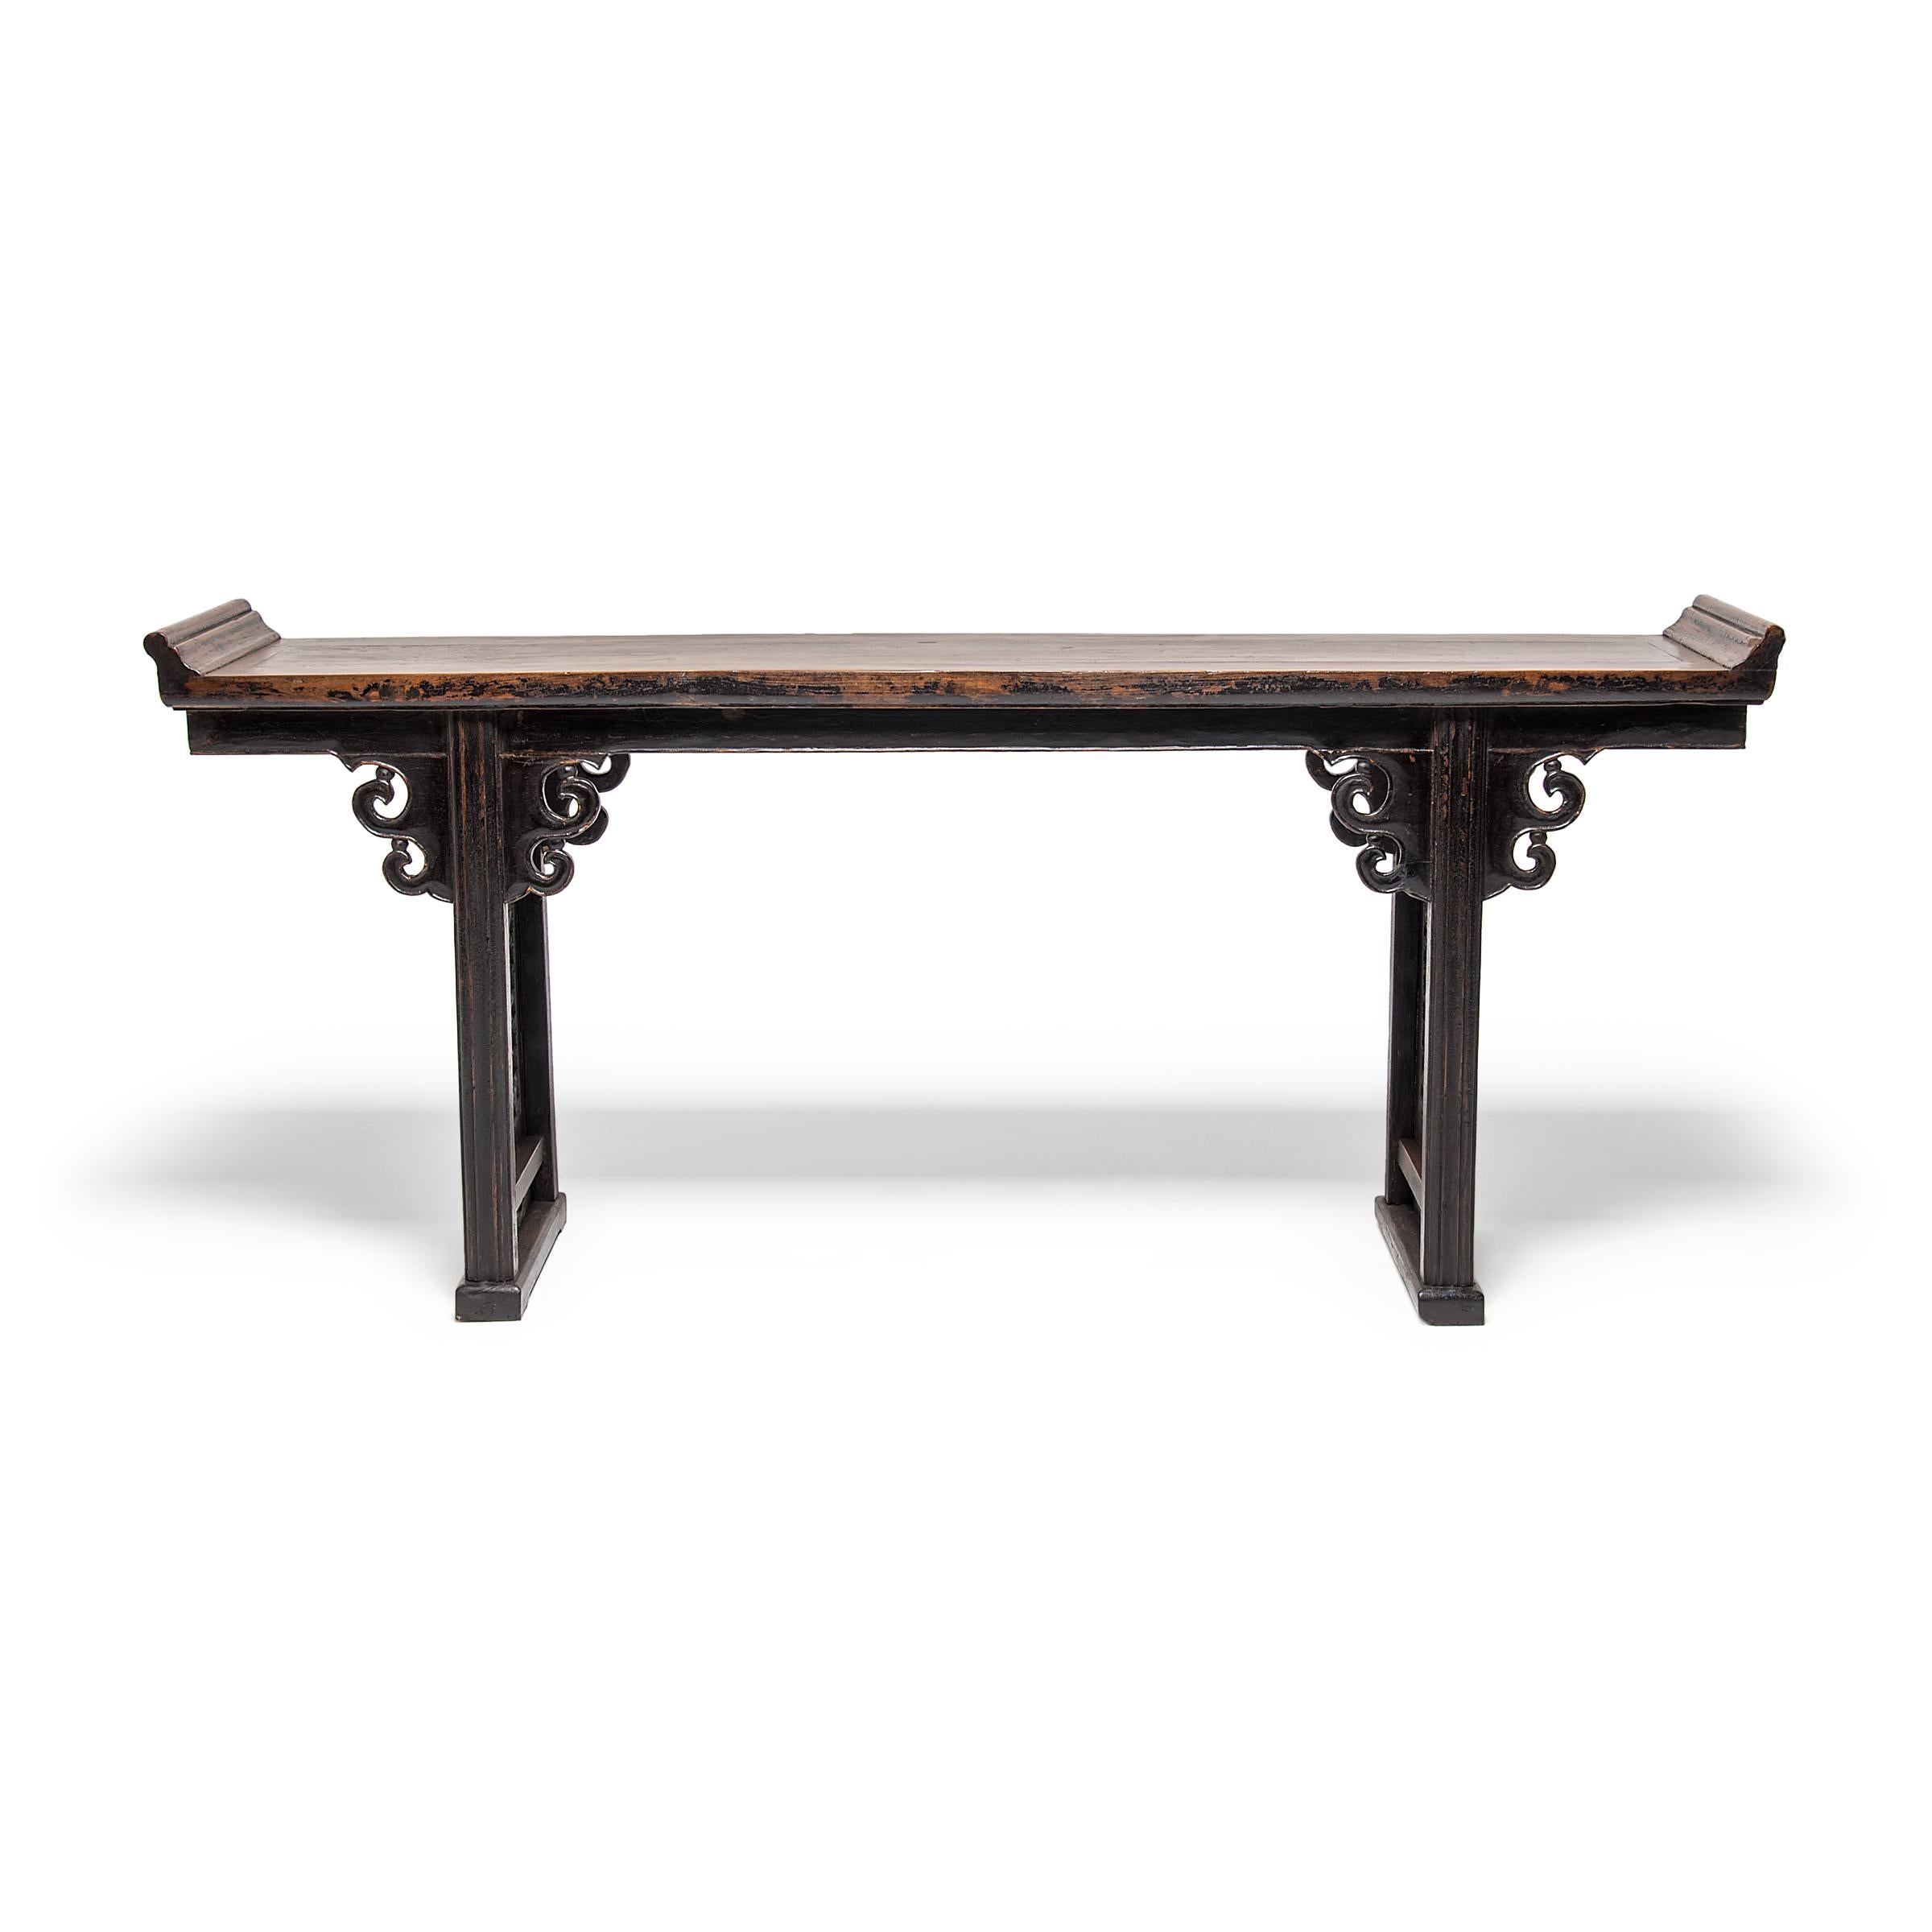 This impressive 19th century Asian altar table from northern China features cloud-form carved spandrels and beautiful lattice side panels. The curvilinear latticework is patterned to resemble delicate plum blossoms, common symbols of winter and